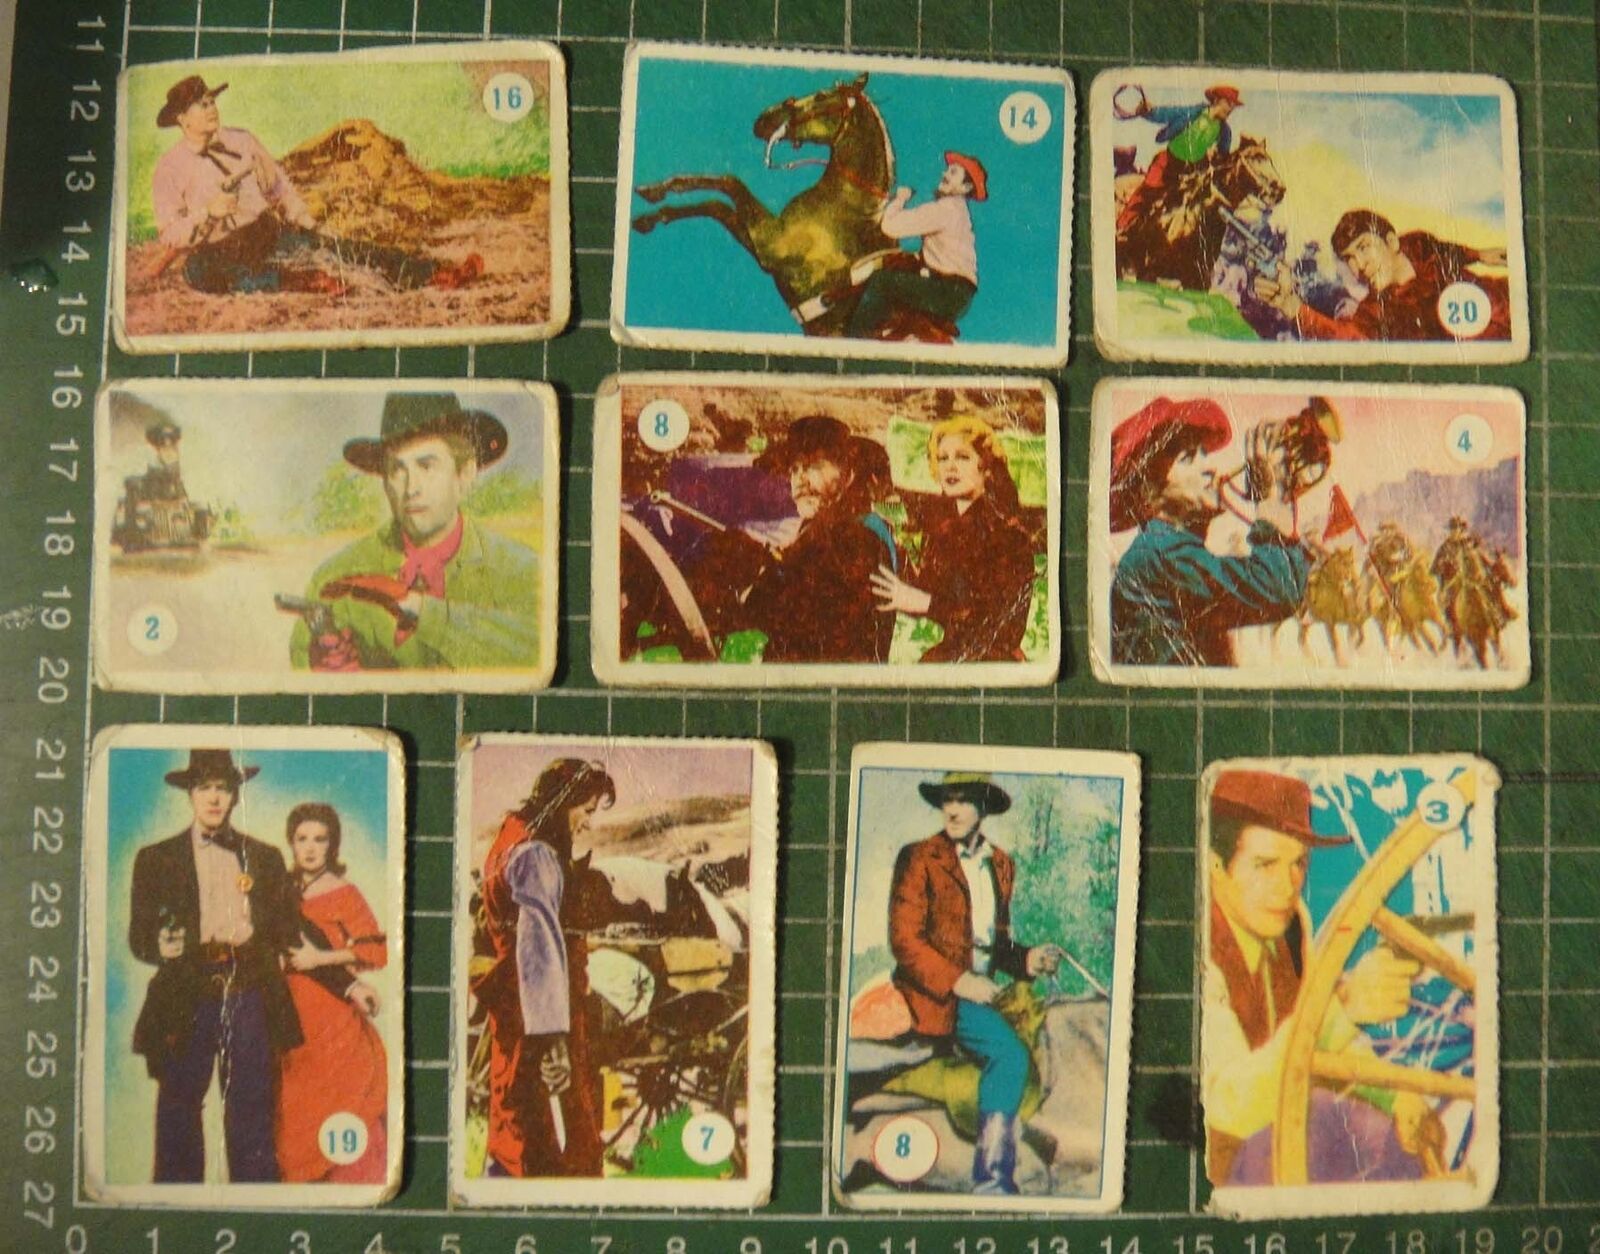 BS1-64) 1970's Malaysia Vintage Trading Cards~COWBOY Gun Fight x 10